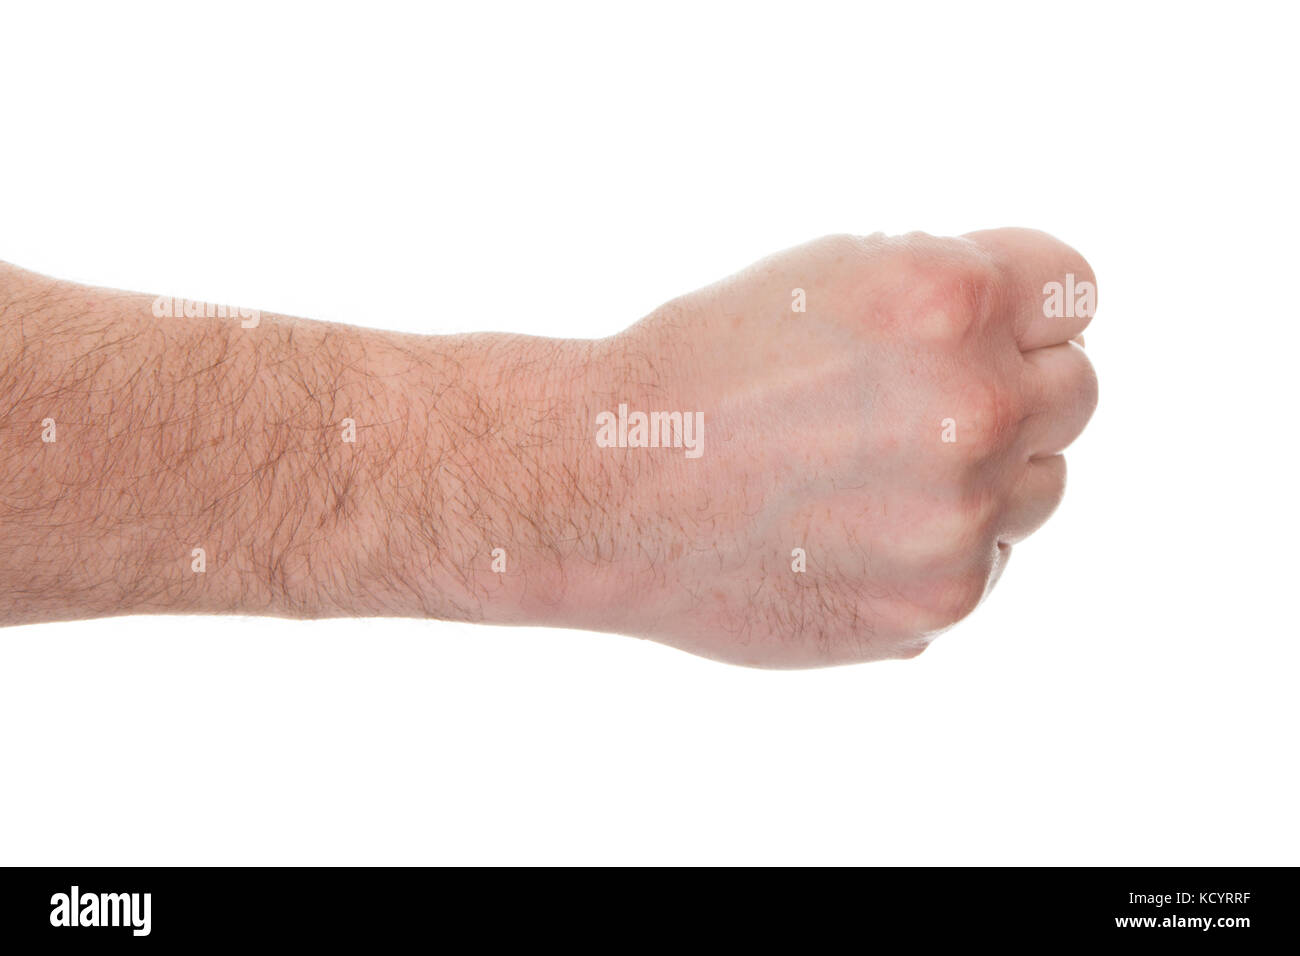 Close-up Man's Hand Clenching His Fist Over White Background Stock Photo